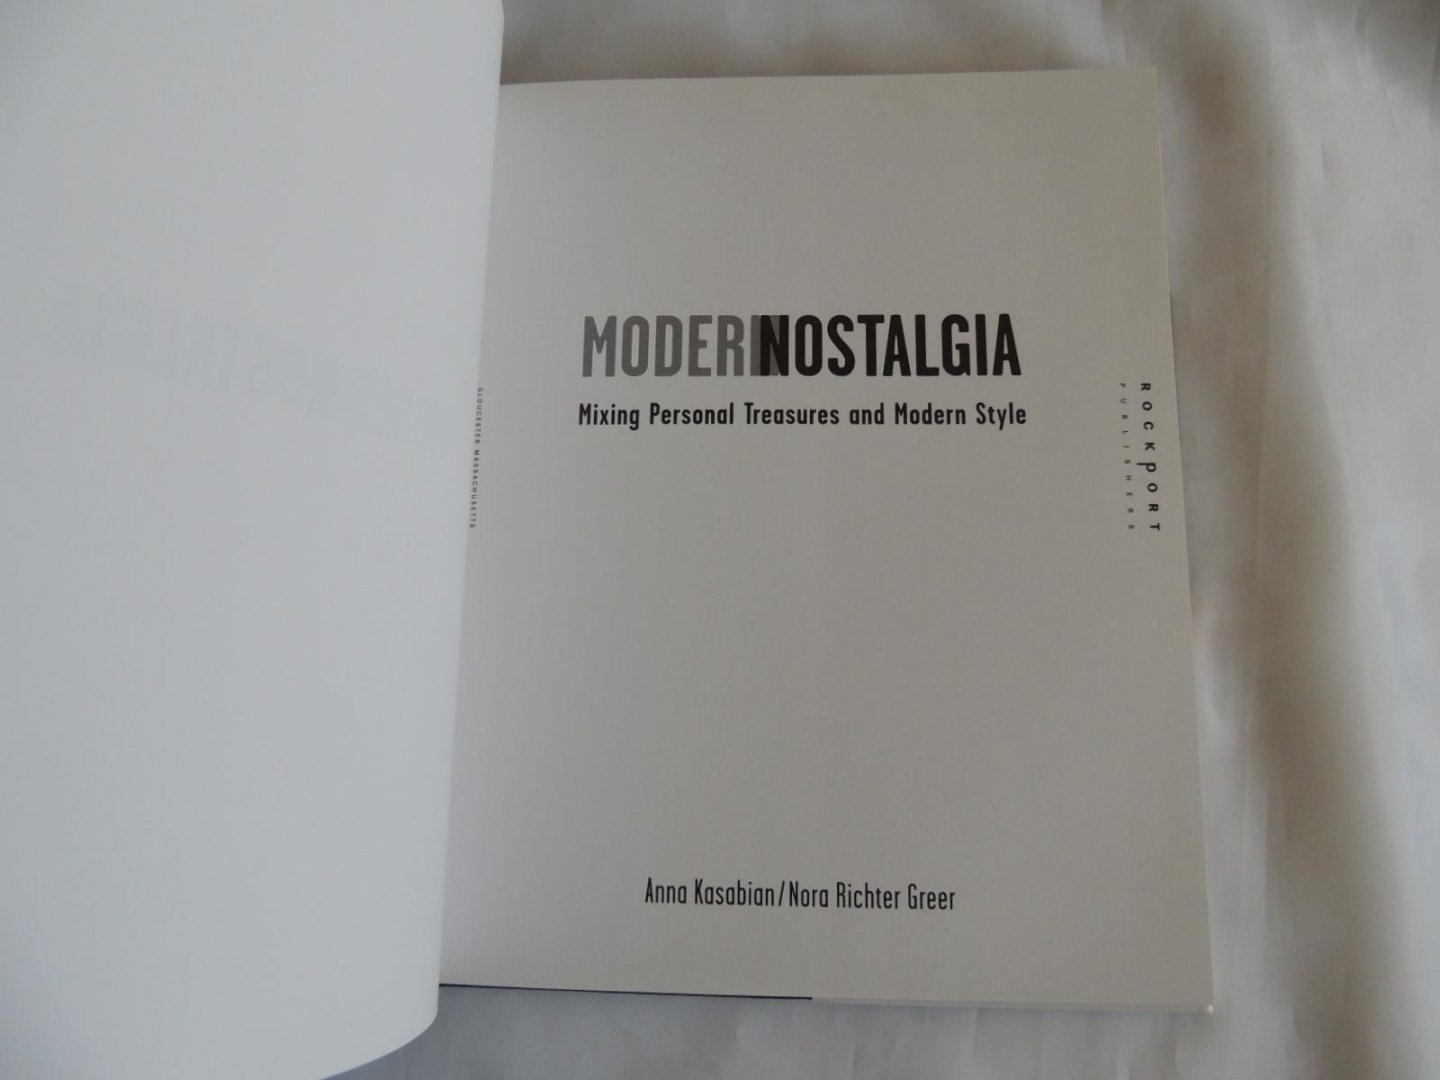 Anna Kasabian, Nora Richter Greer - Modern nostalgia : mixing personal treasures and modern style - Modernnostalgia - Modernostalgia - Modern nostalgie